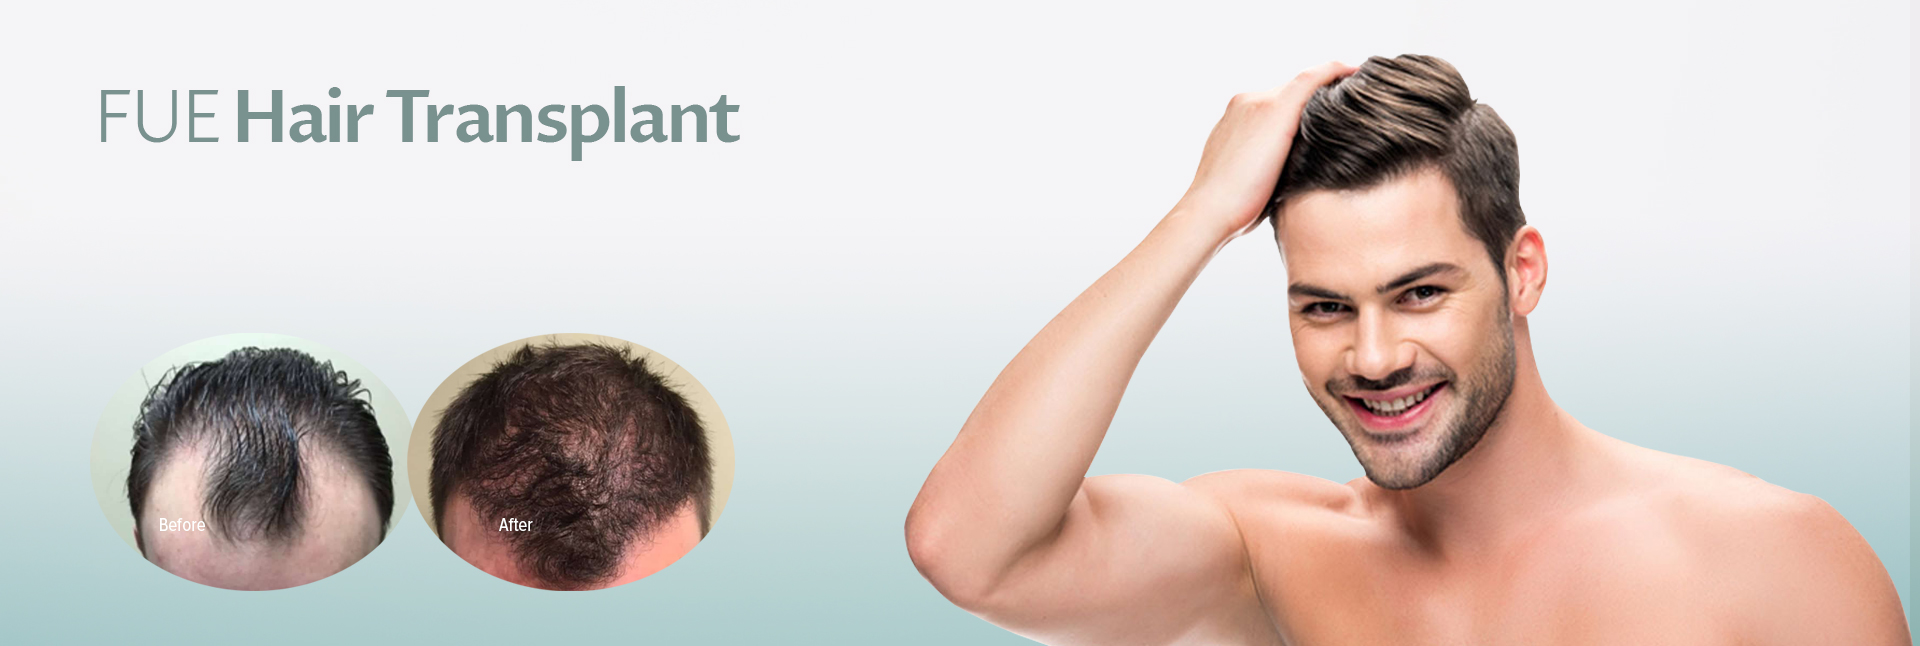 FUE Hair Transplant Surgery Cost | Hair Restoration Clinic London